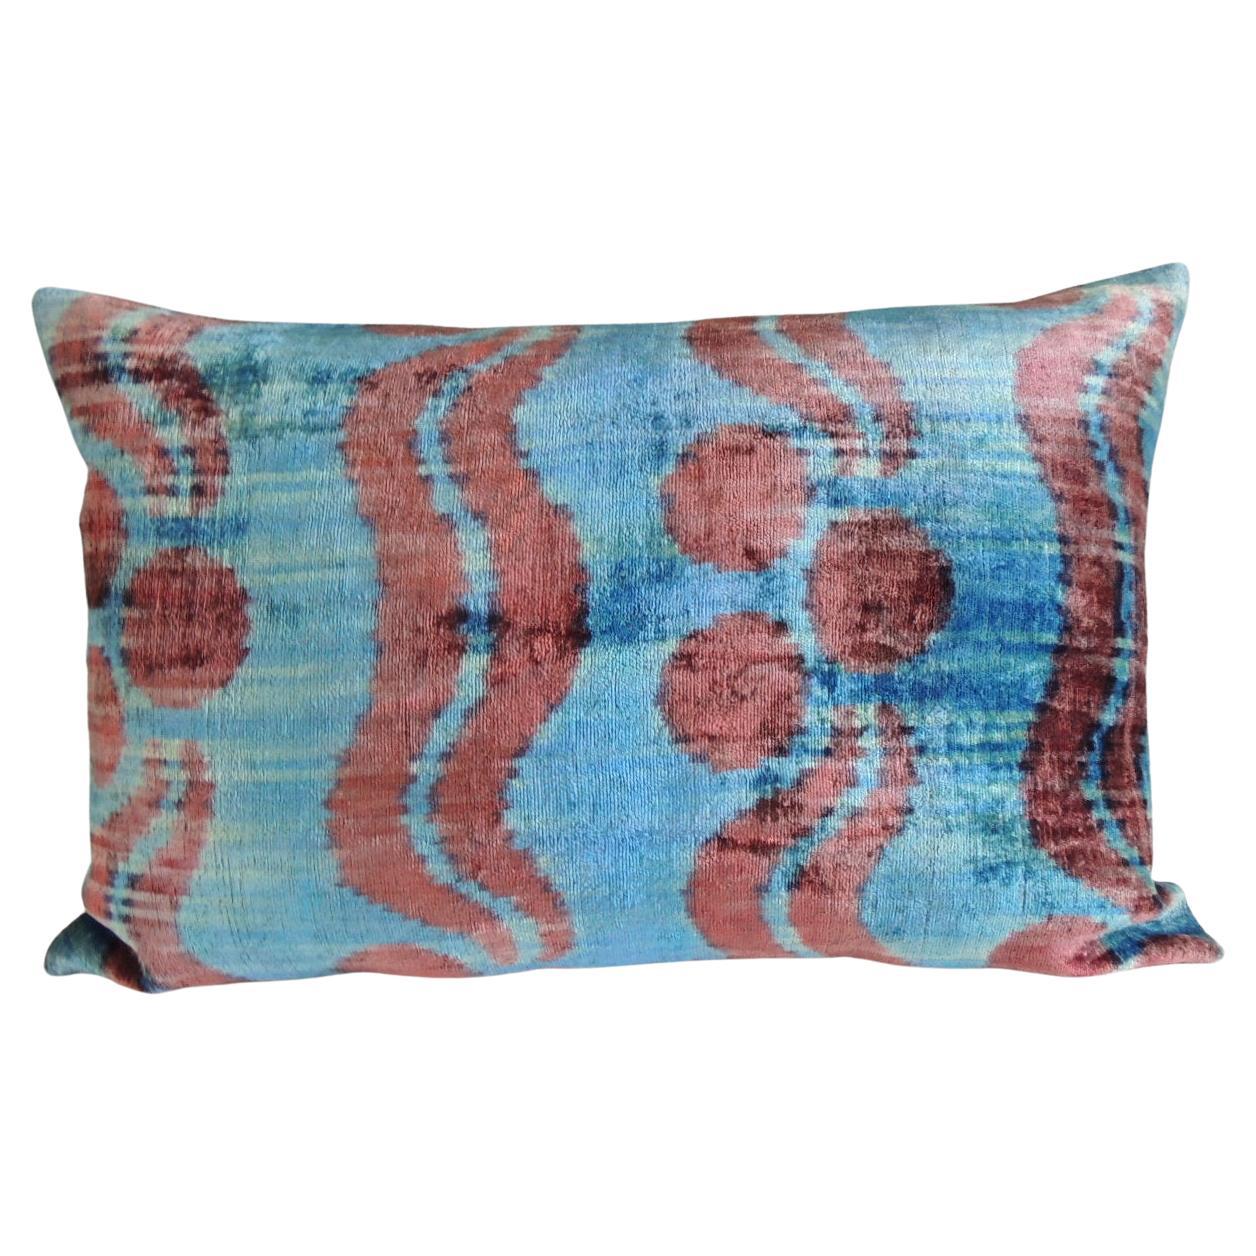 Ikat Blue and Pink Decorative Bolster Pillow with Hot Pink Linen Backing